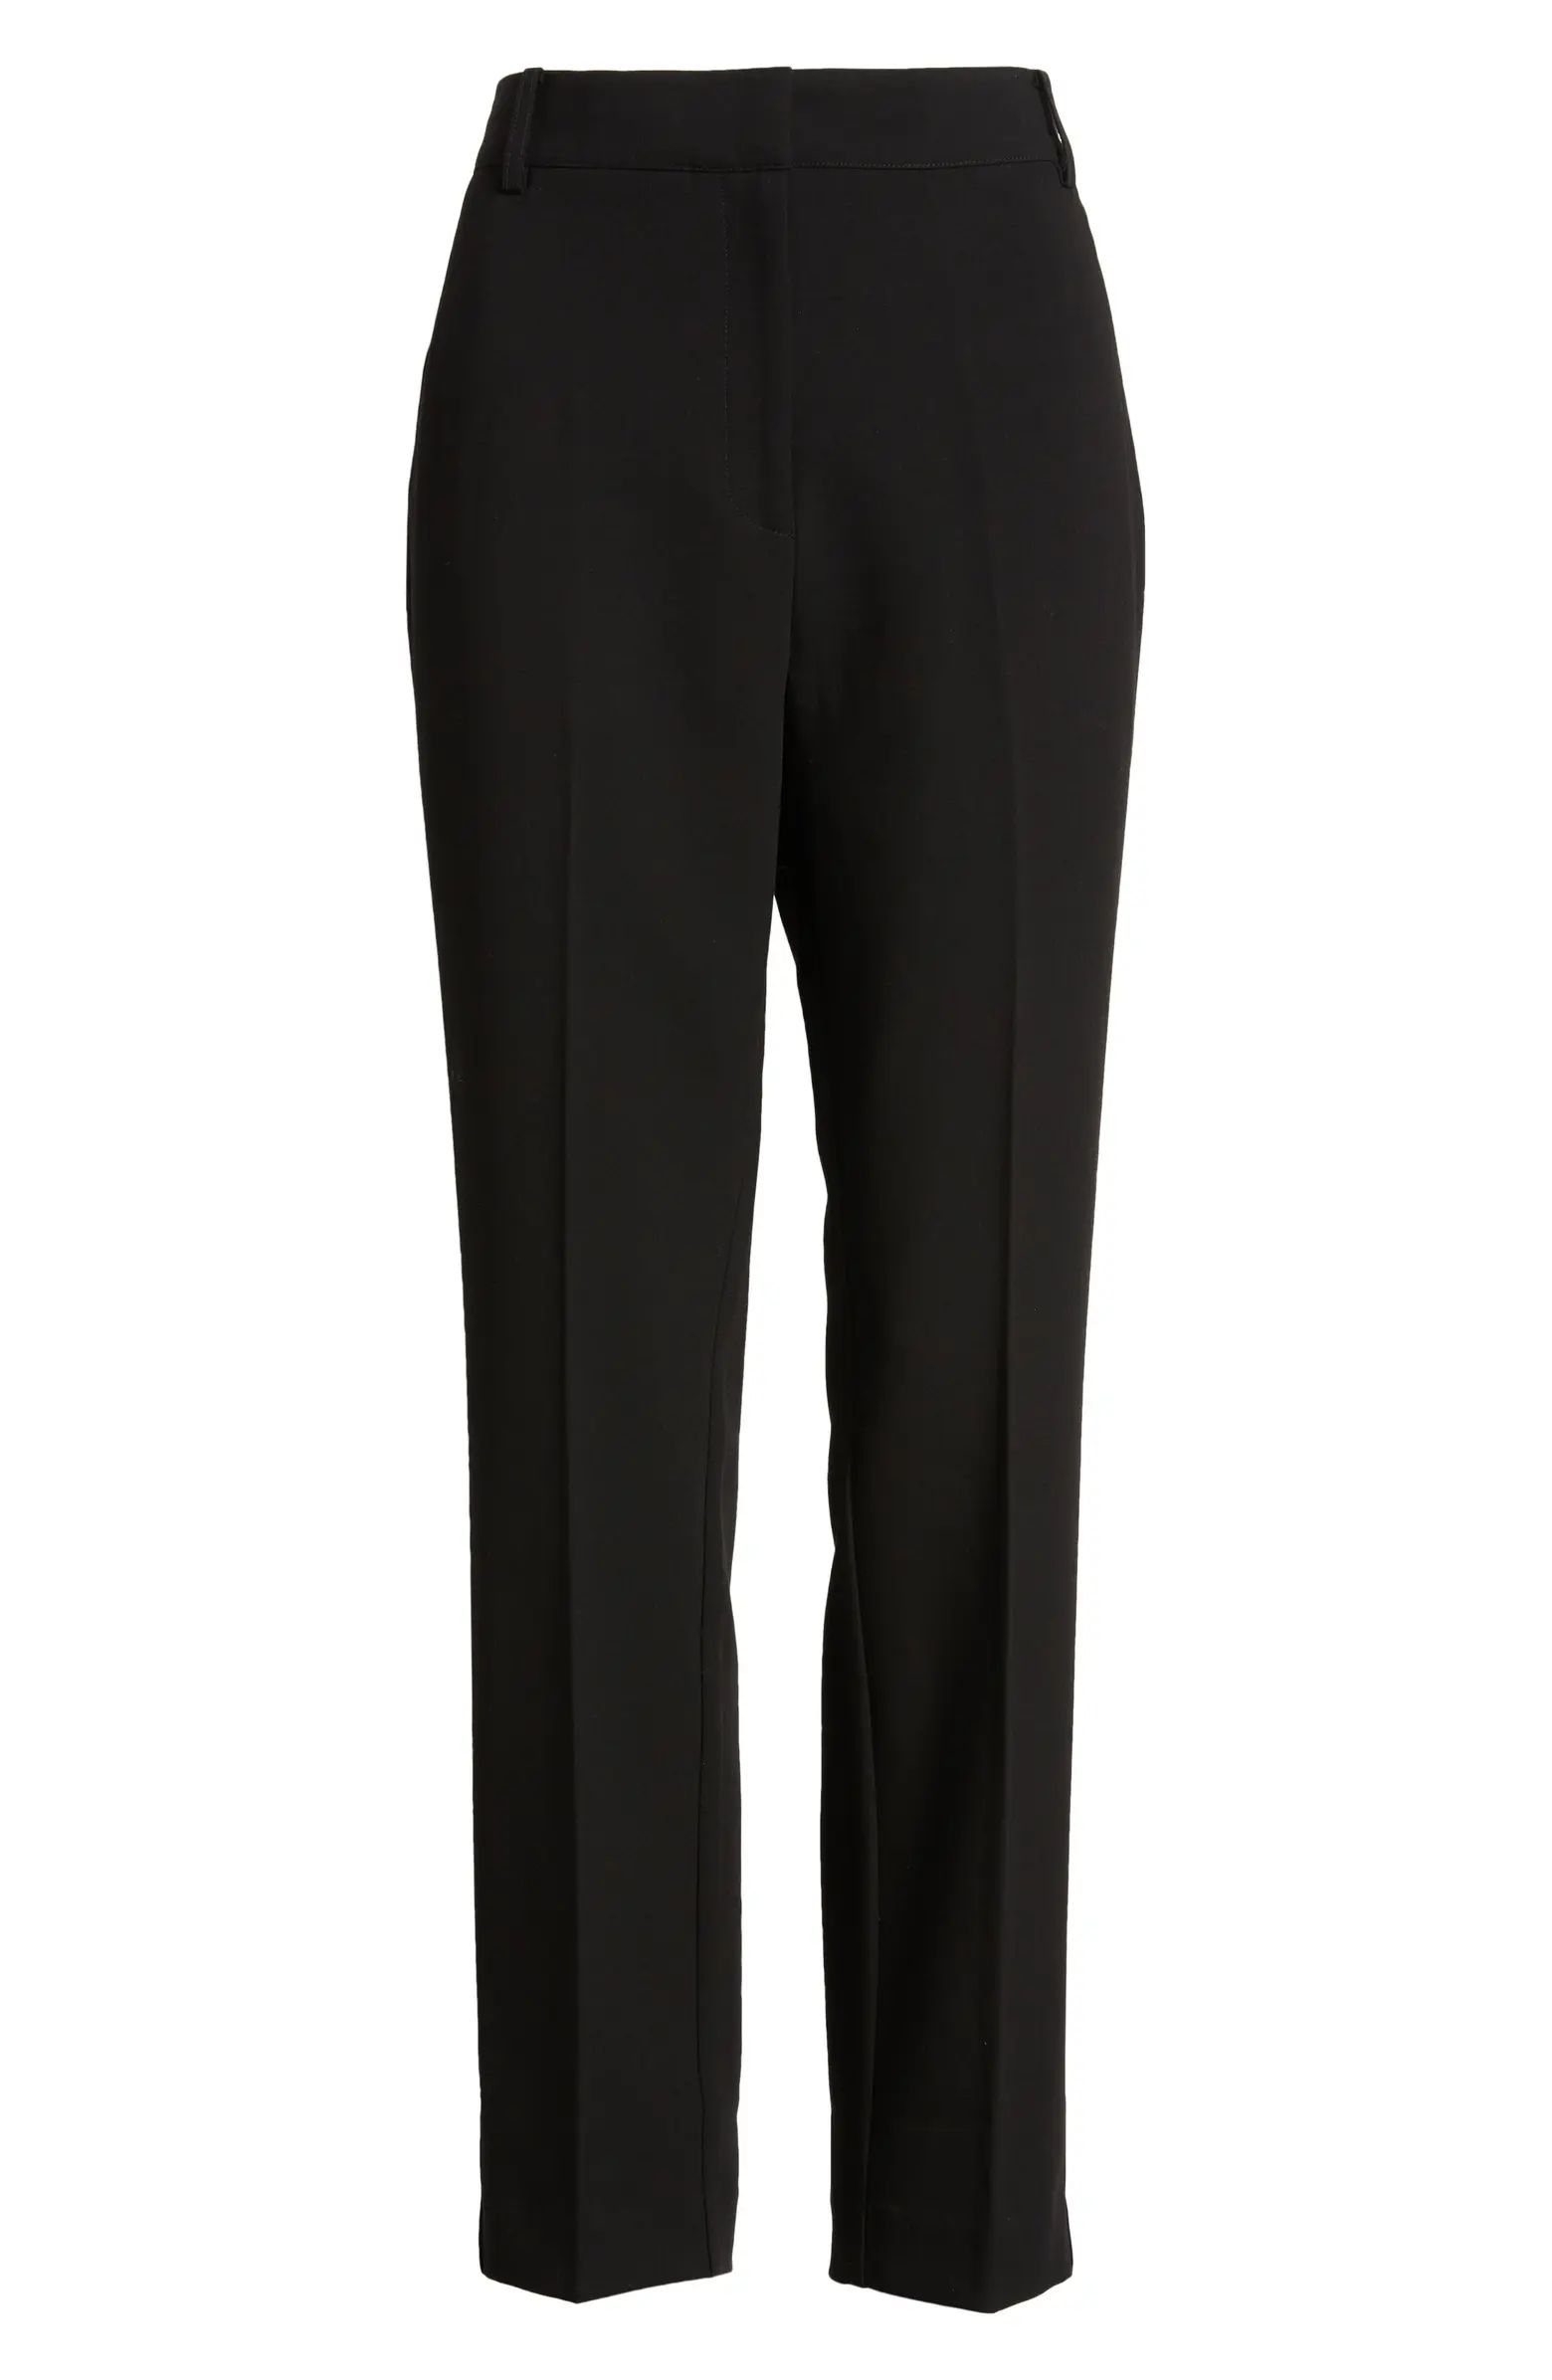 Stretch Twill Pants | Nordstrom